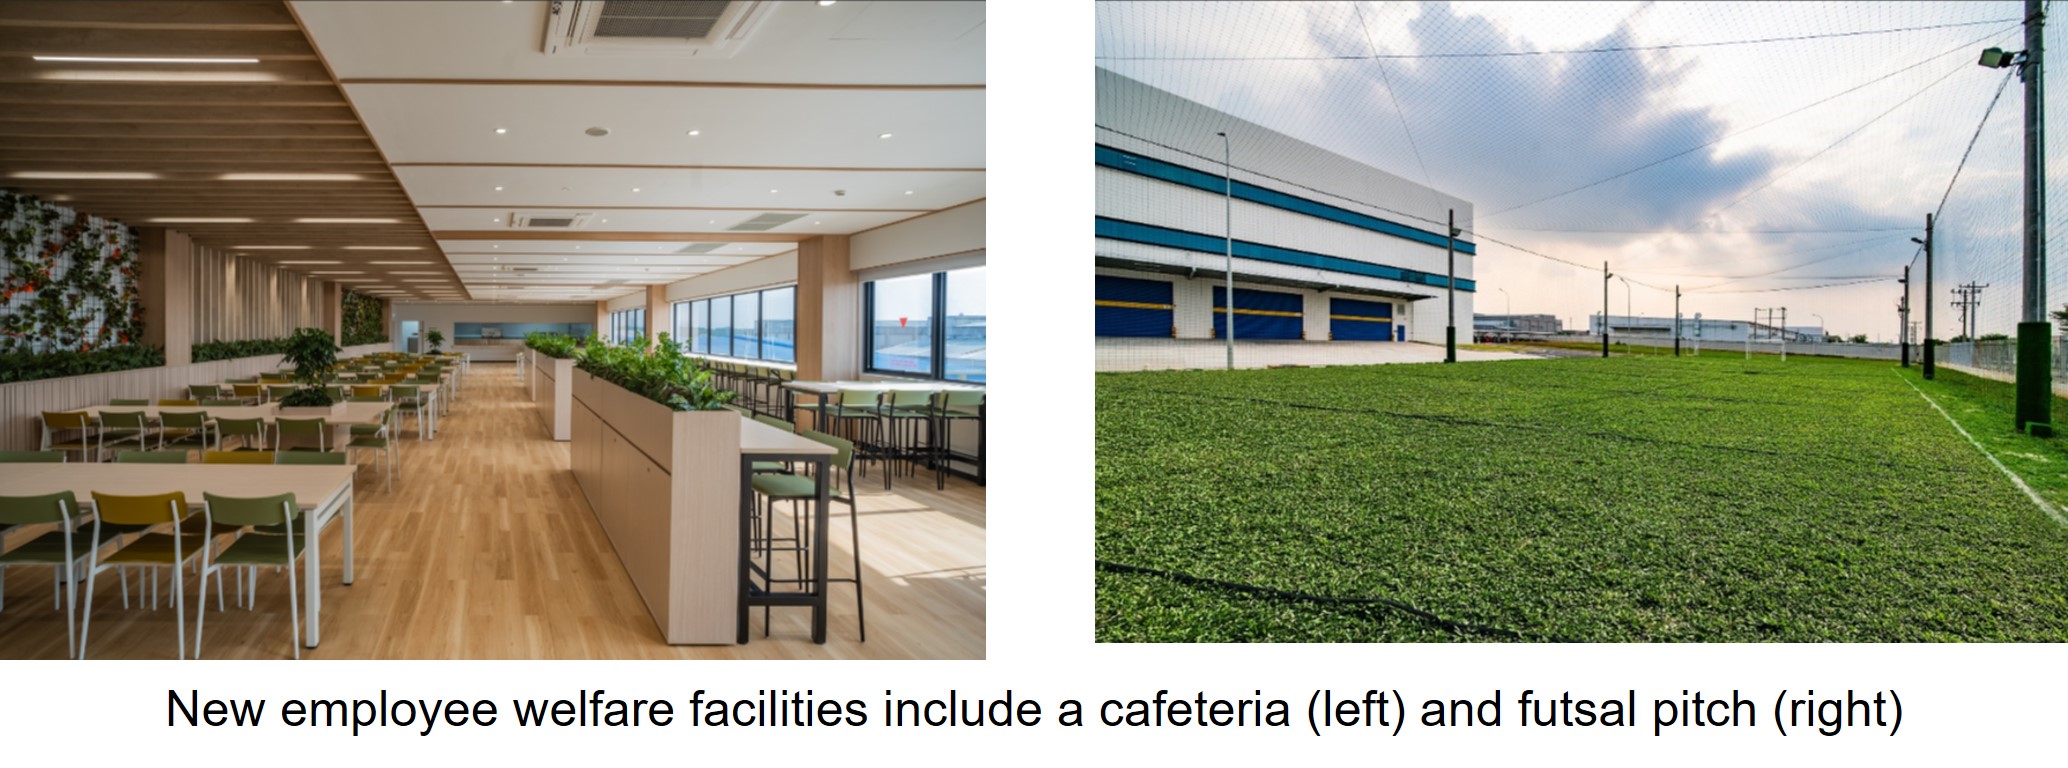 image:New employee welfare facilities include a cafeteria (left) and futsal pitch (right)